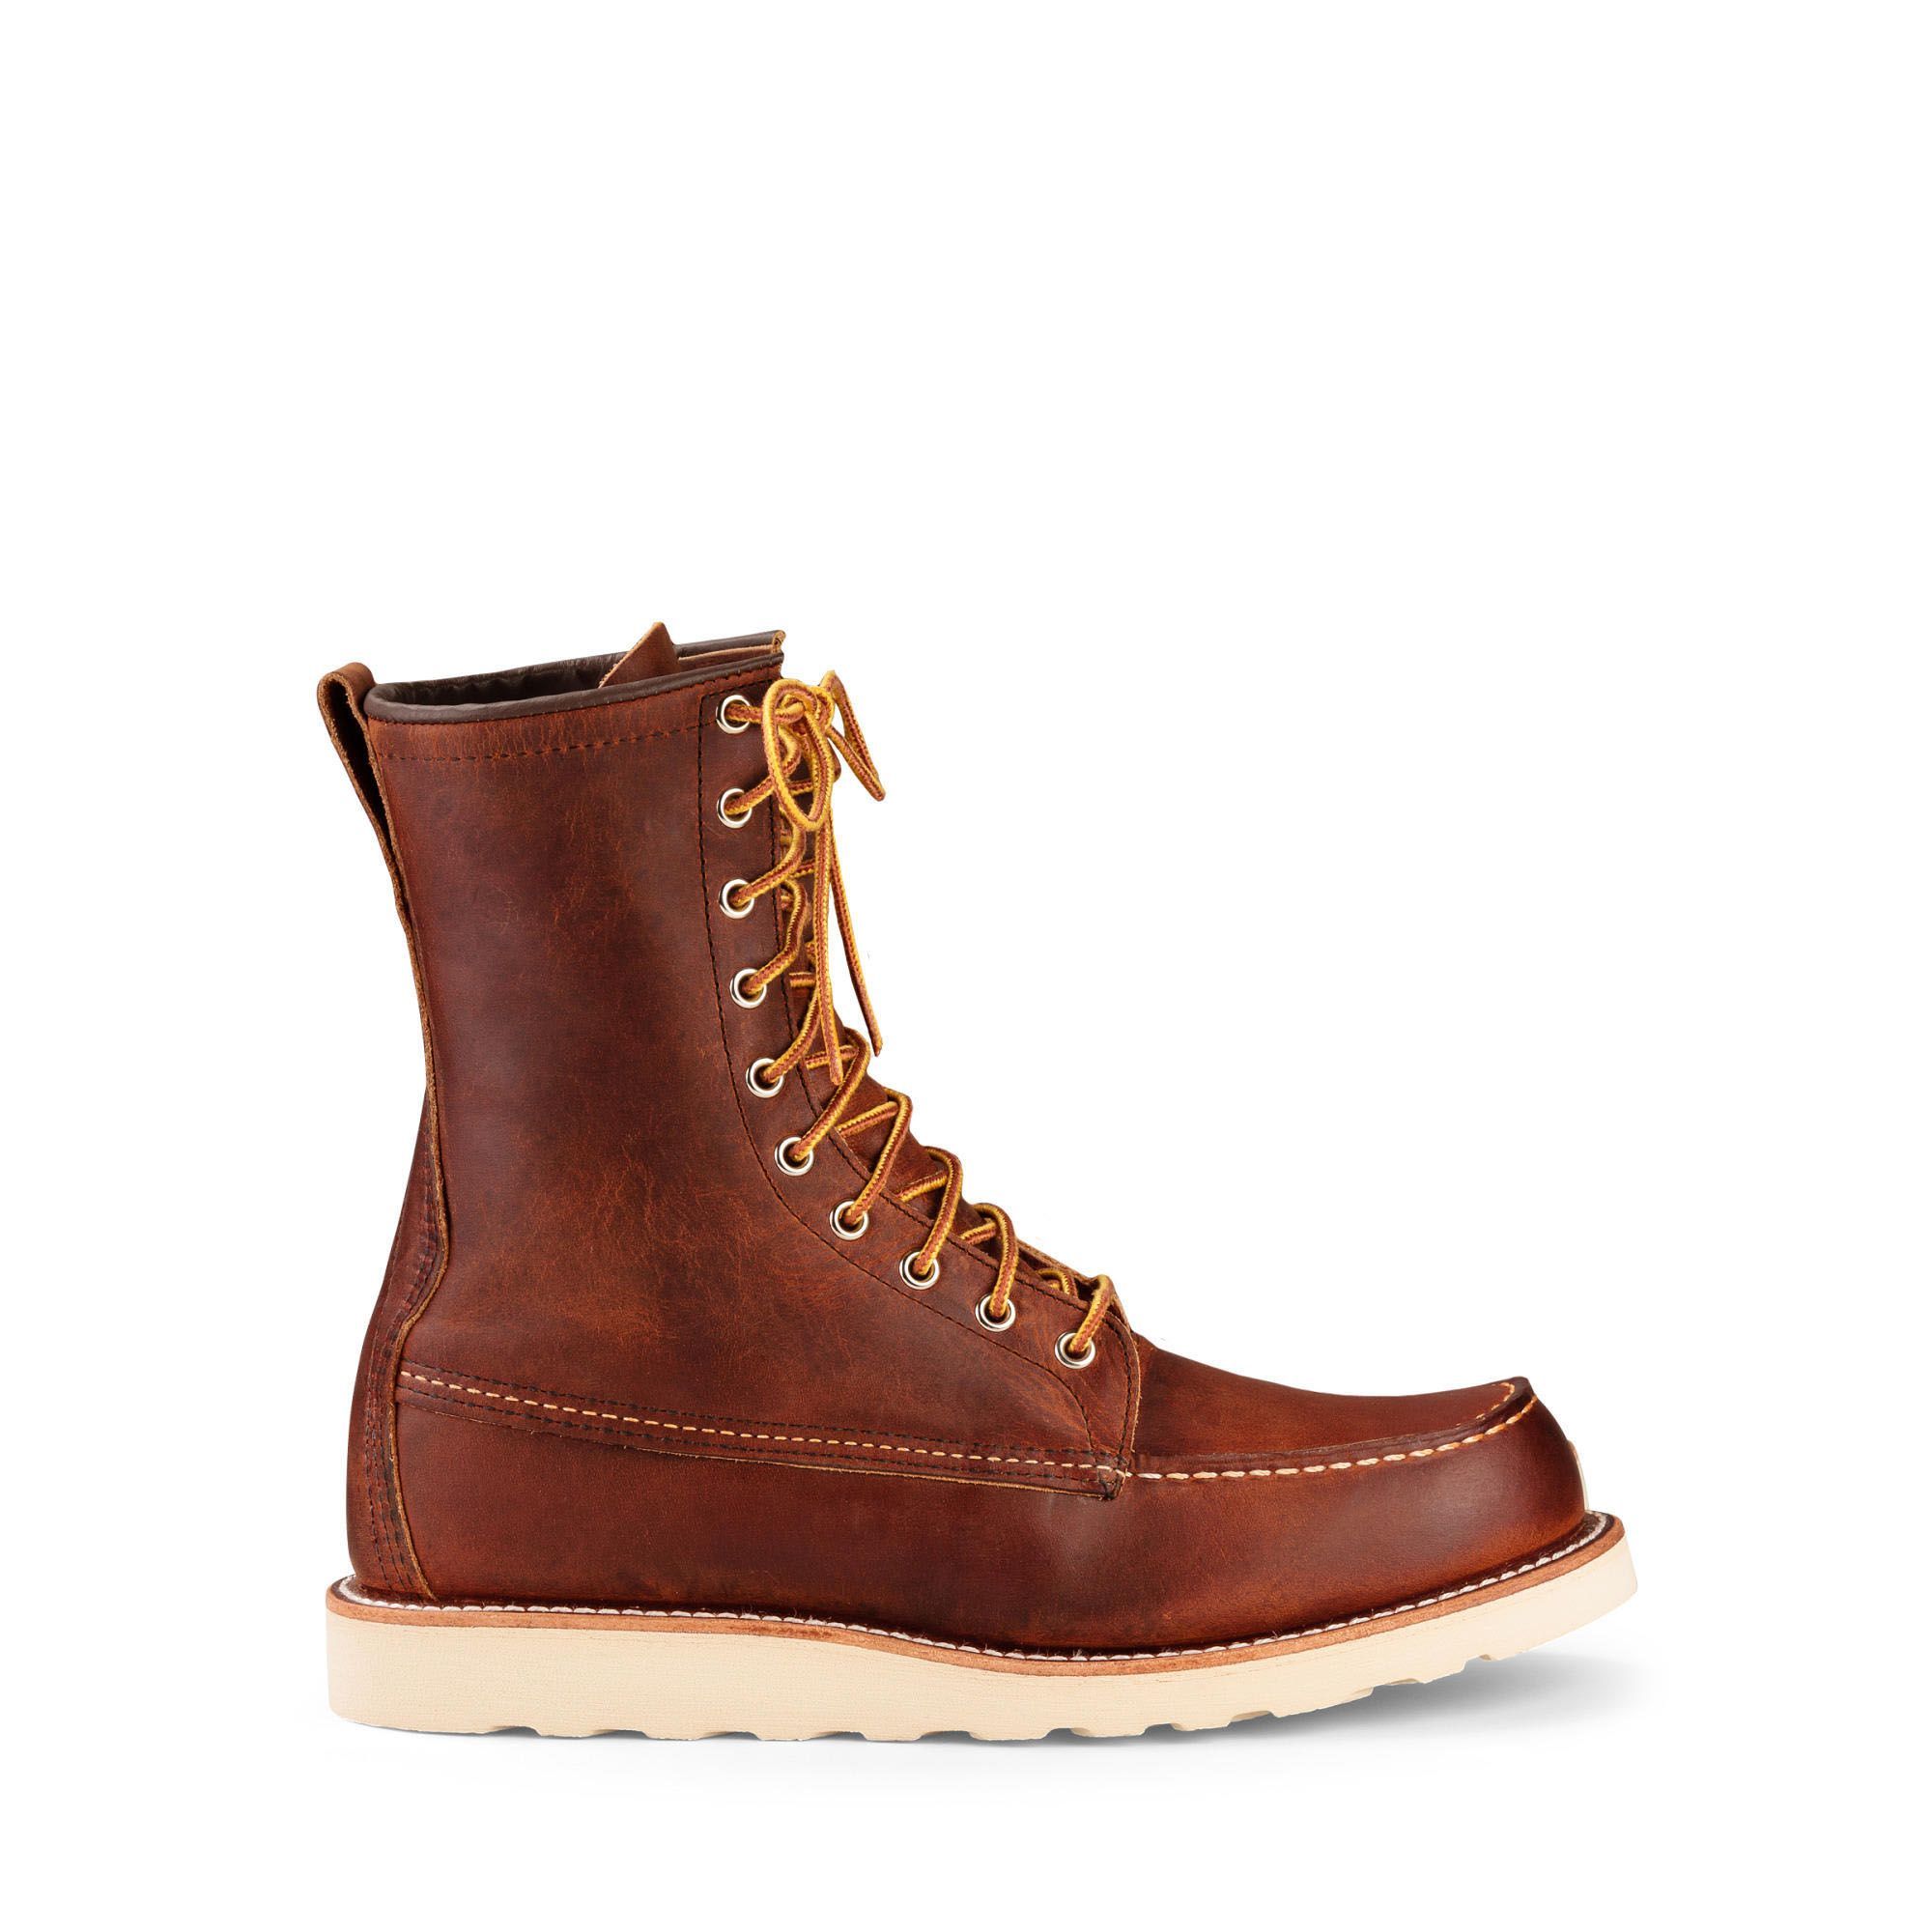 justin work boots wedge sole